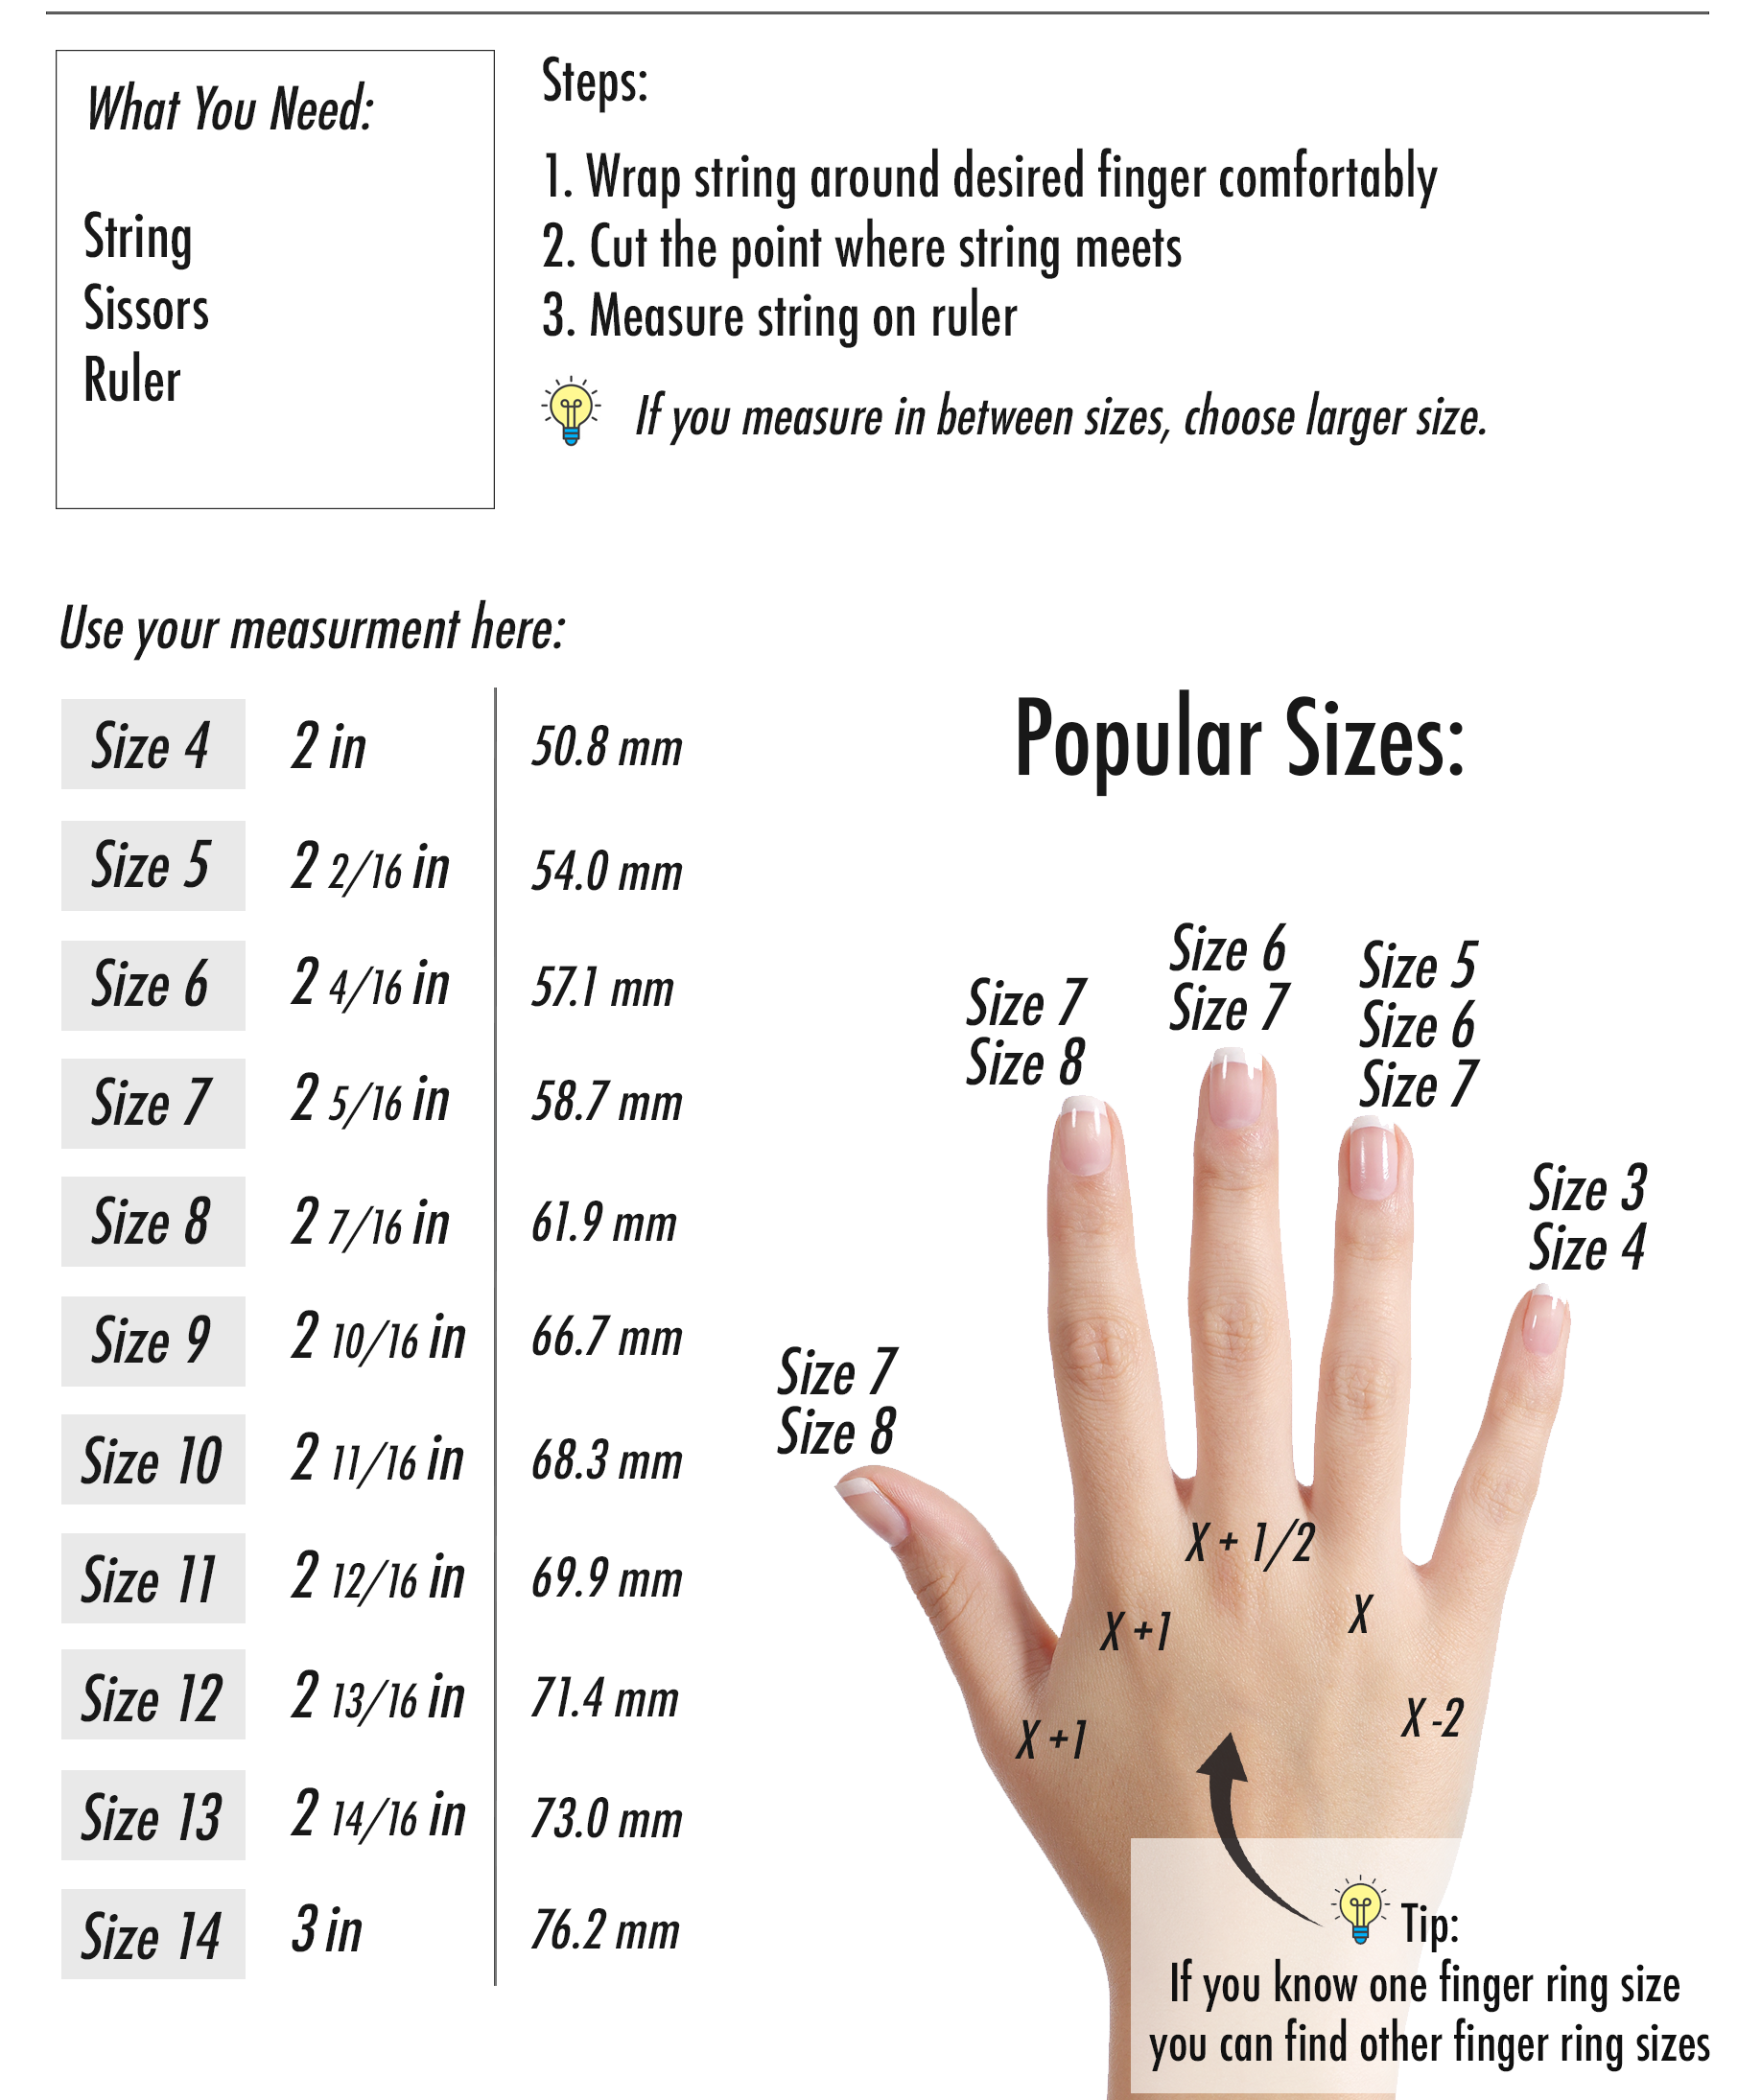 How To Measure Your Ring Size \\ SEVEN50 – SEVEN50